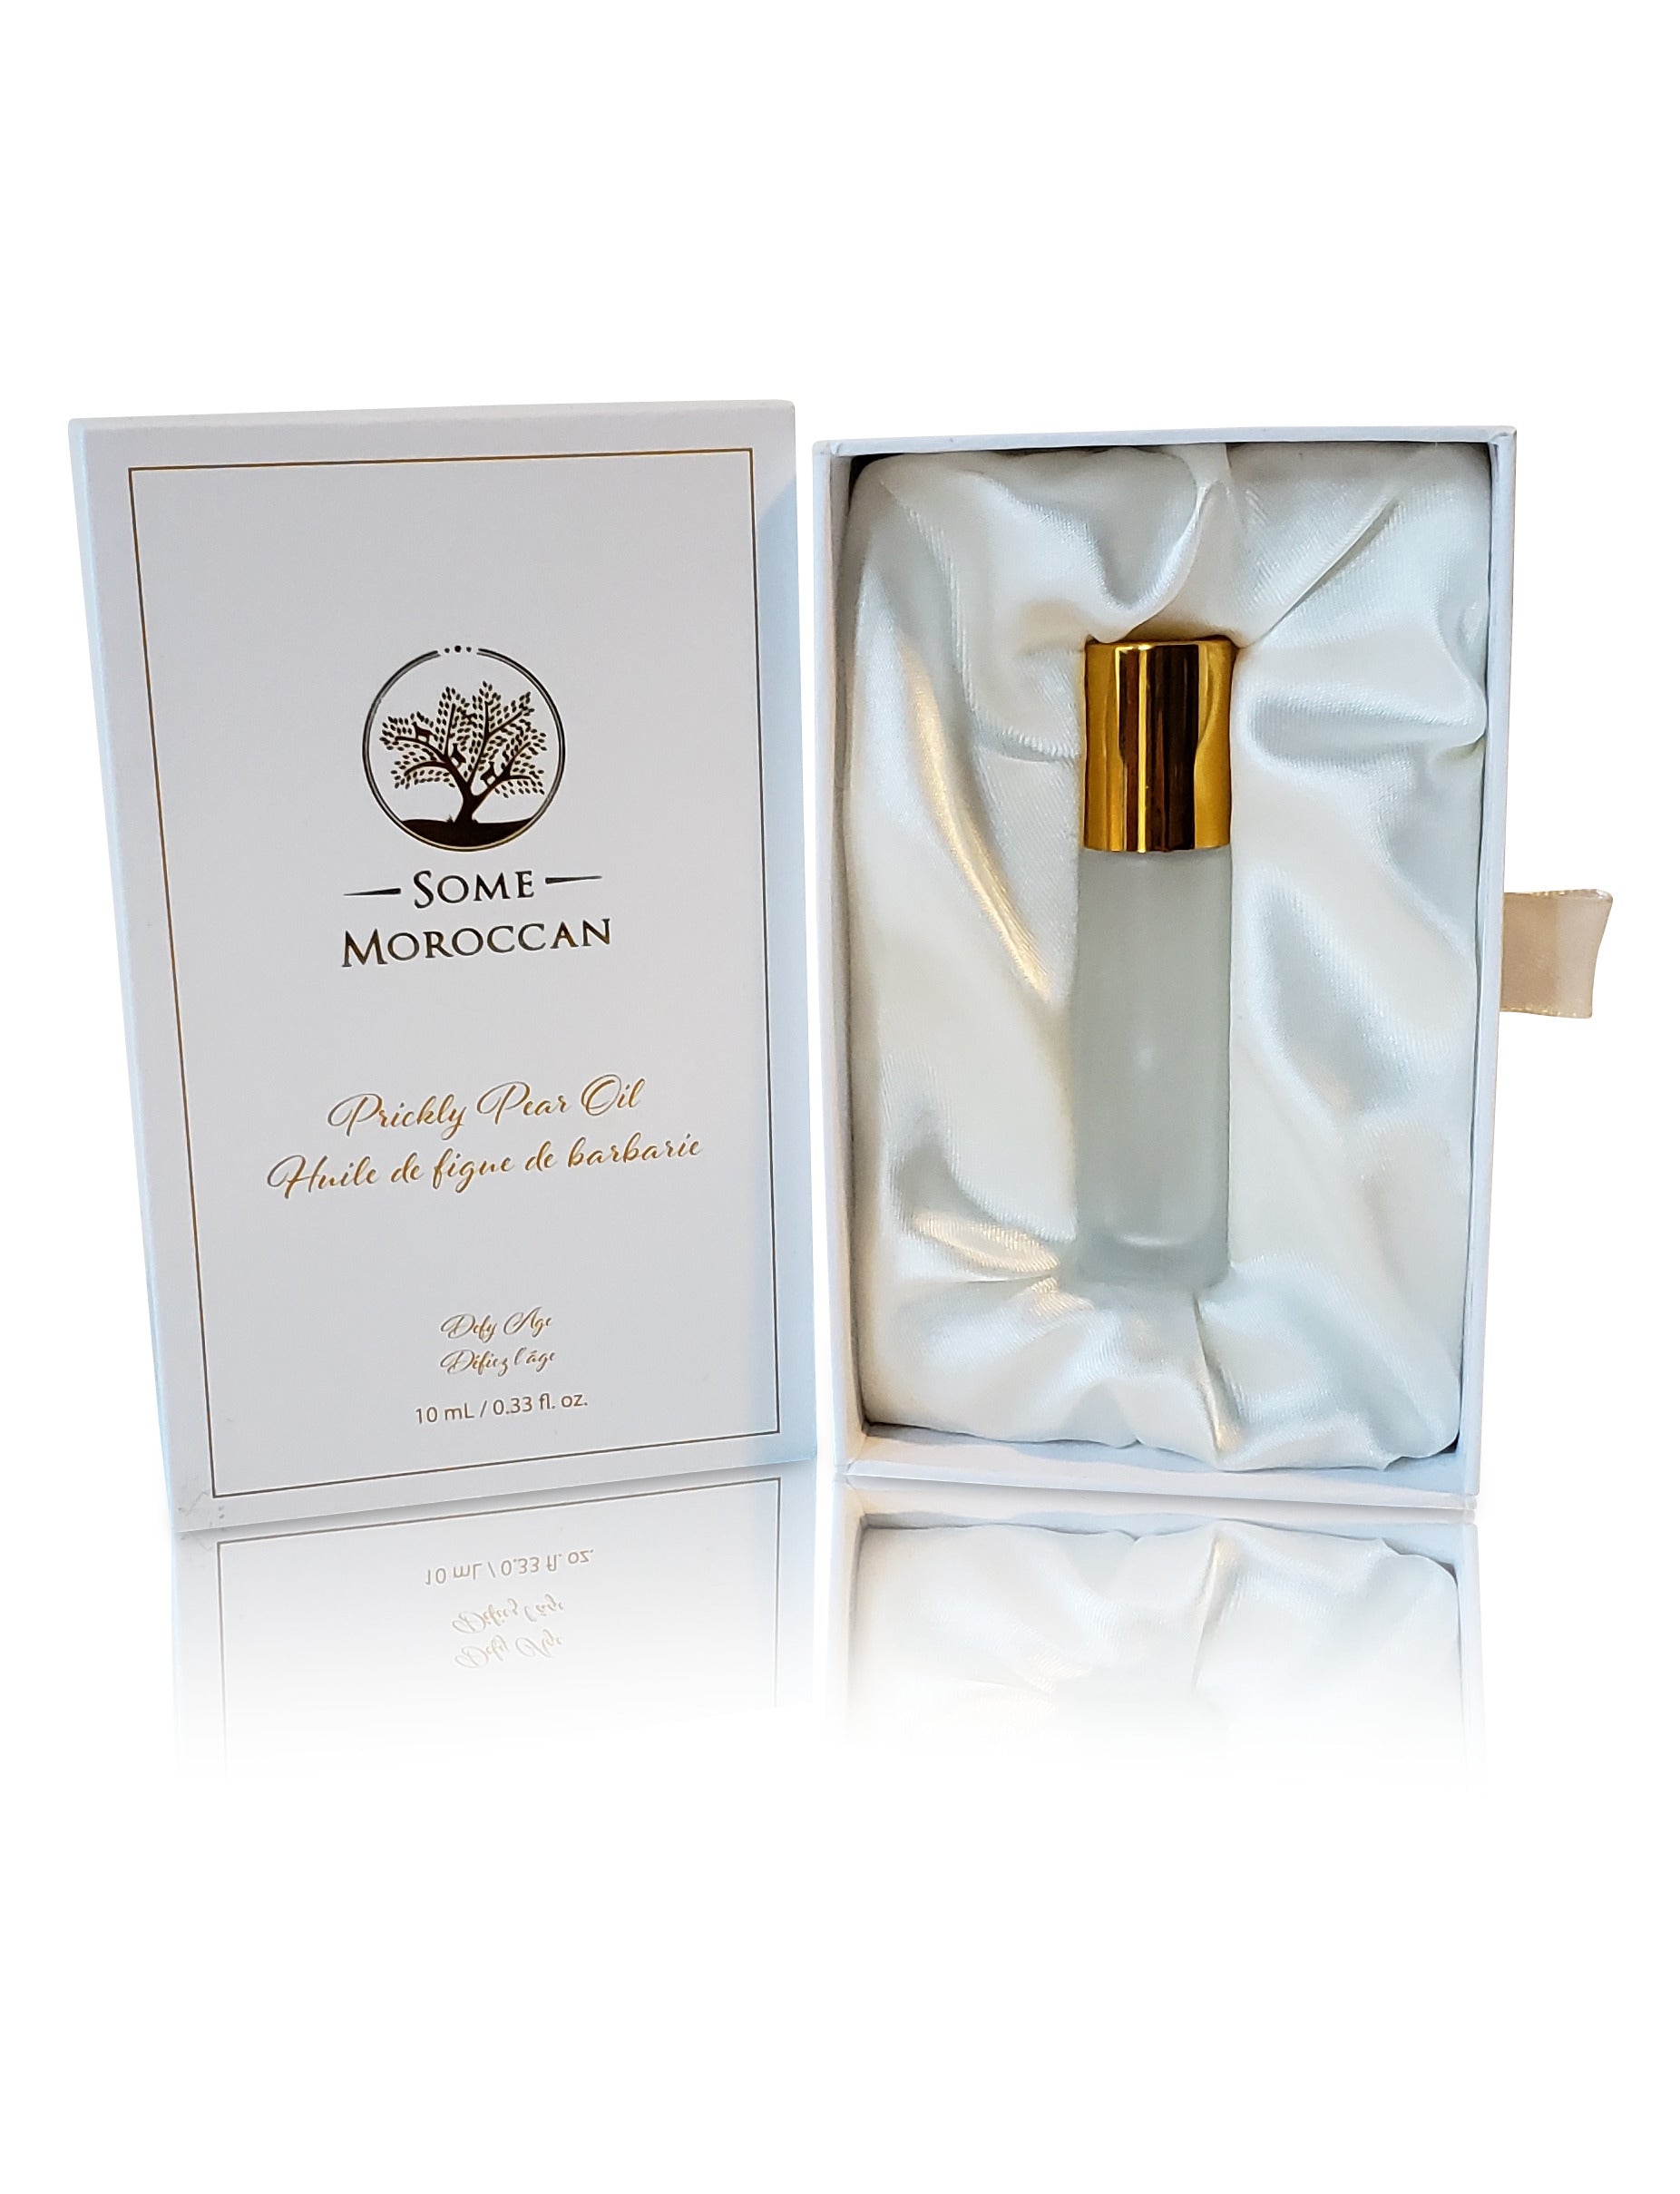 Some Moroccan™ - Defy Age (Luxury Prickly Pear Seed Oil)